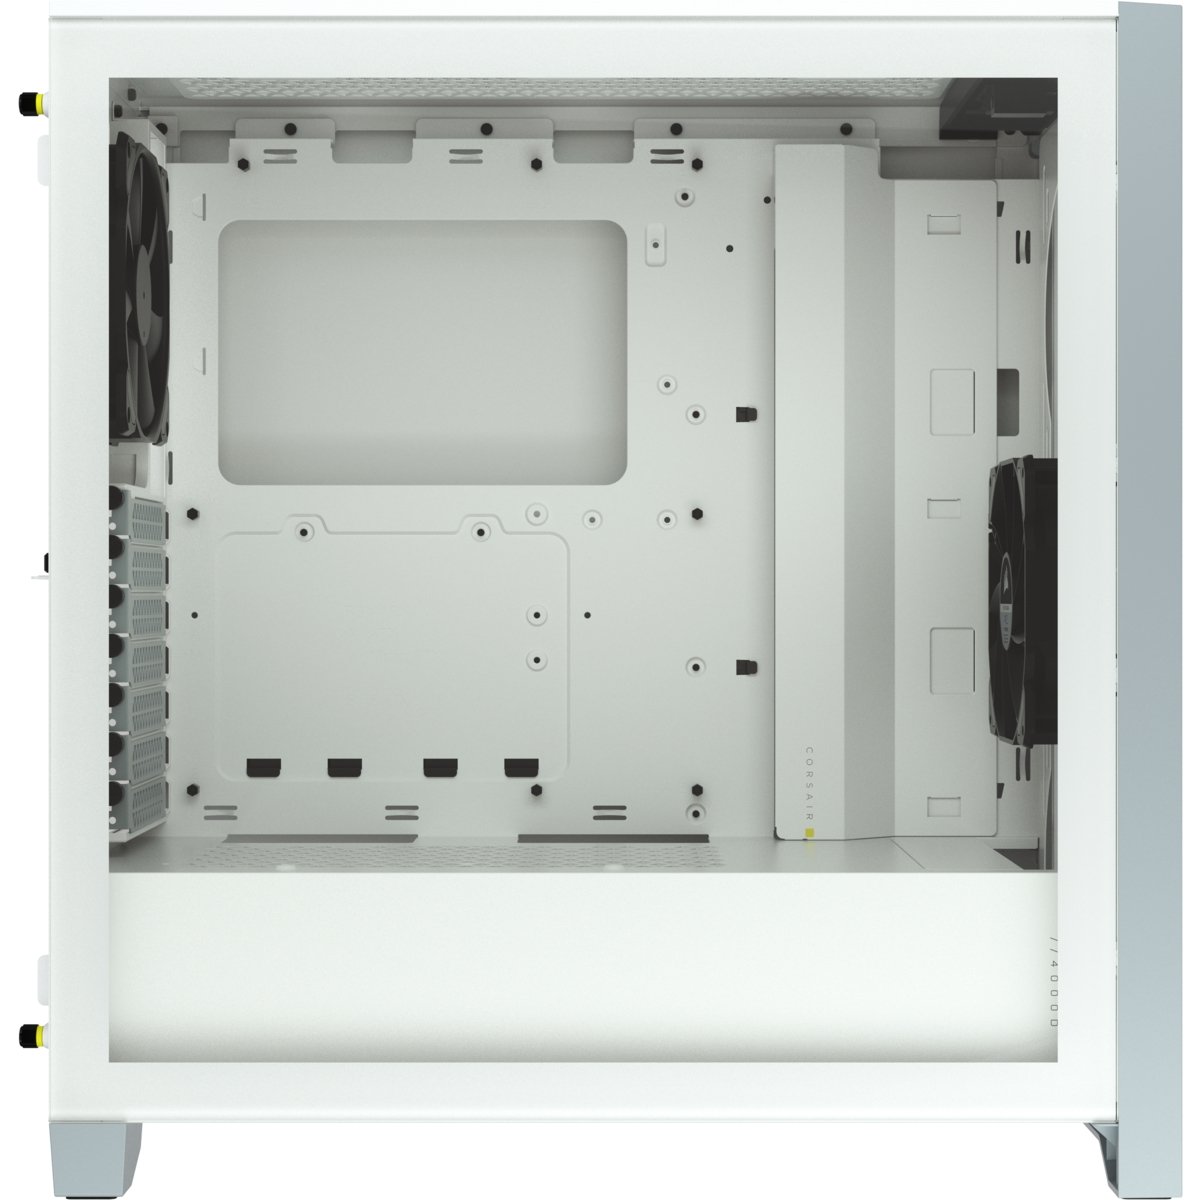 Corsair Carbide Series 4000D Airflow ATX Tempered Glass White, 2x 120mm Fans pre-installed. USB 3.0 x 2, Audio I/O. Case - I Gaming Computer | Australia Wide Shipping | Buy now, Pay Later with Afterpay, Klarna, Zip, Latitude & Paypal